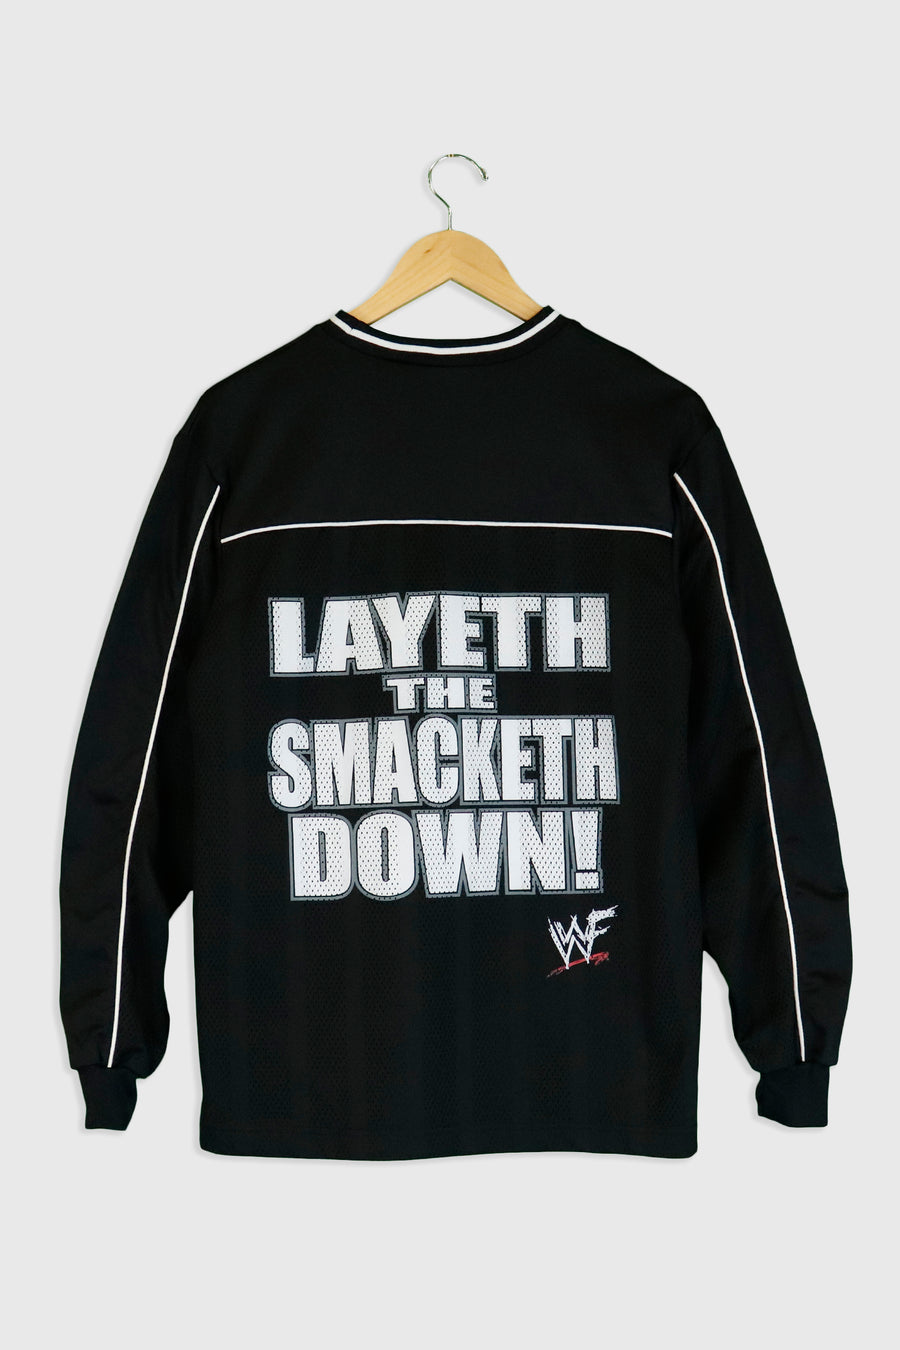 Vintage WWF Lay The Smacketh Down Long Sleeve Jersey Sz M